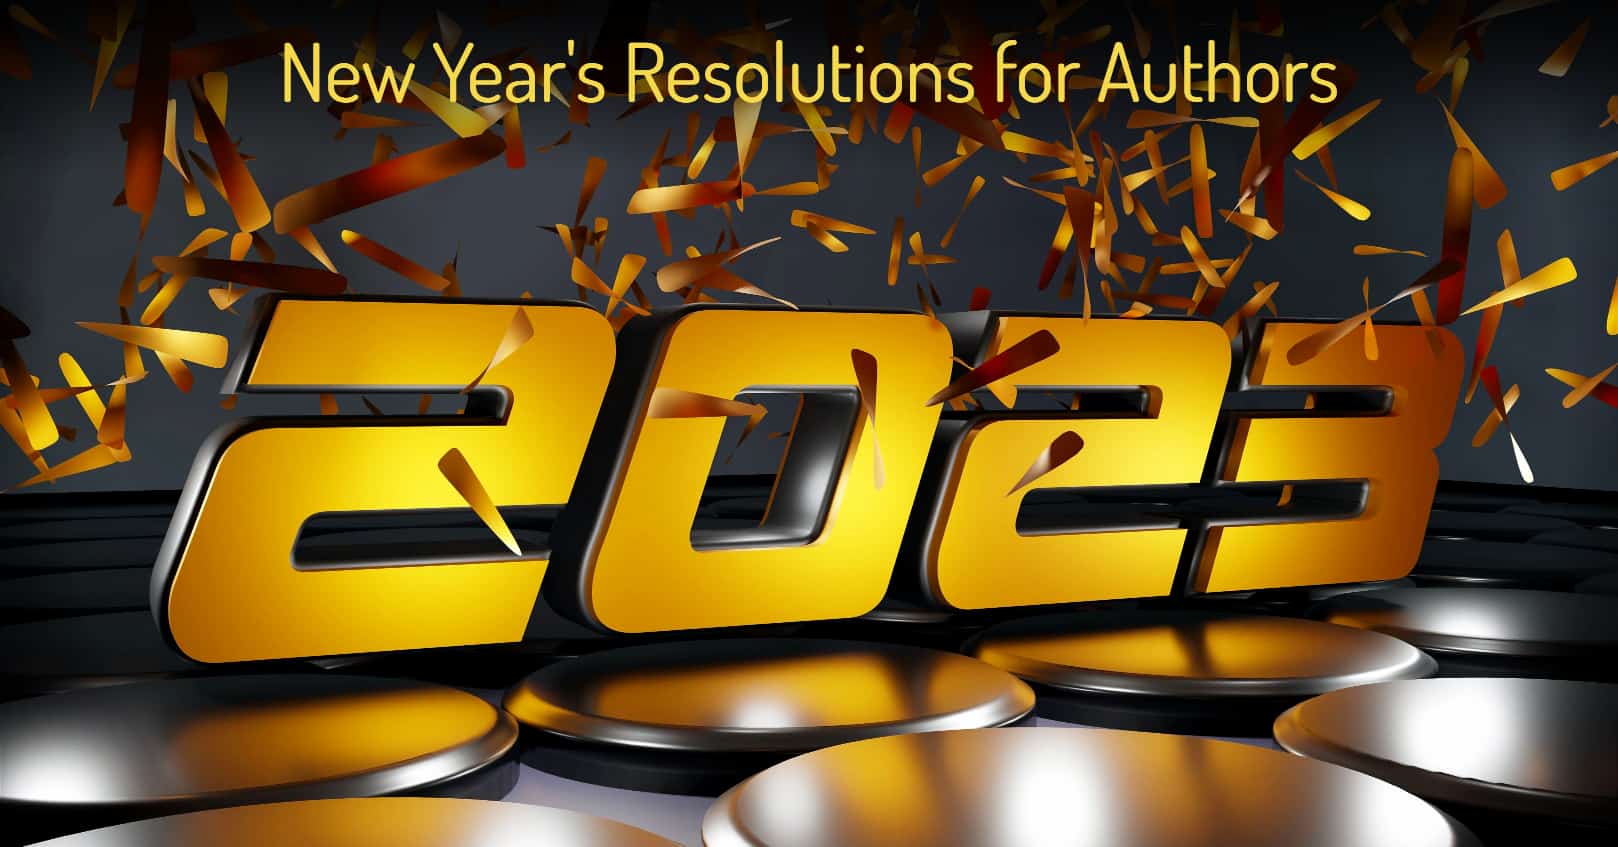 New Year’s Resolutions for Authors